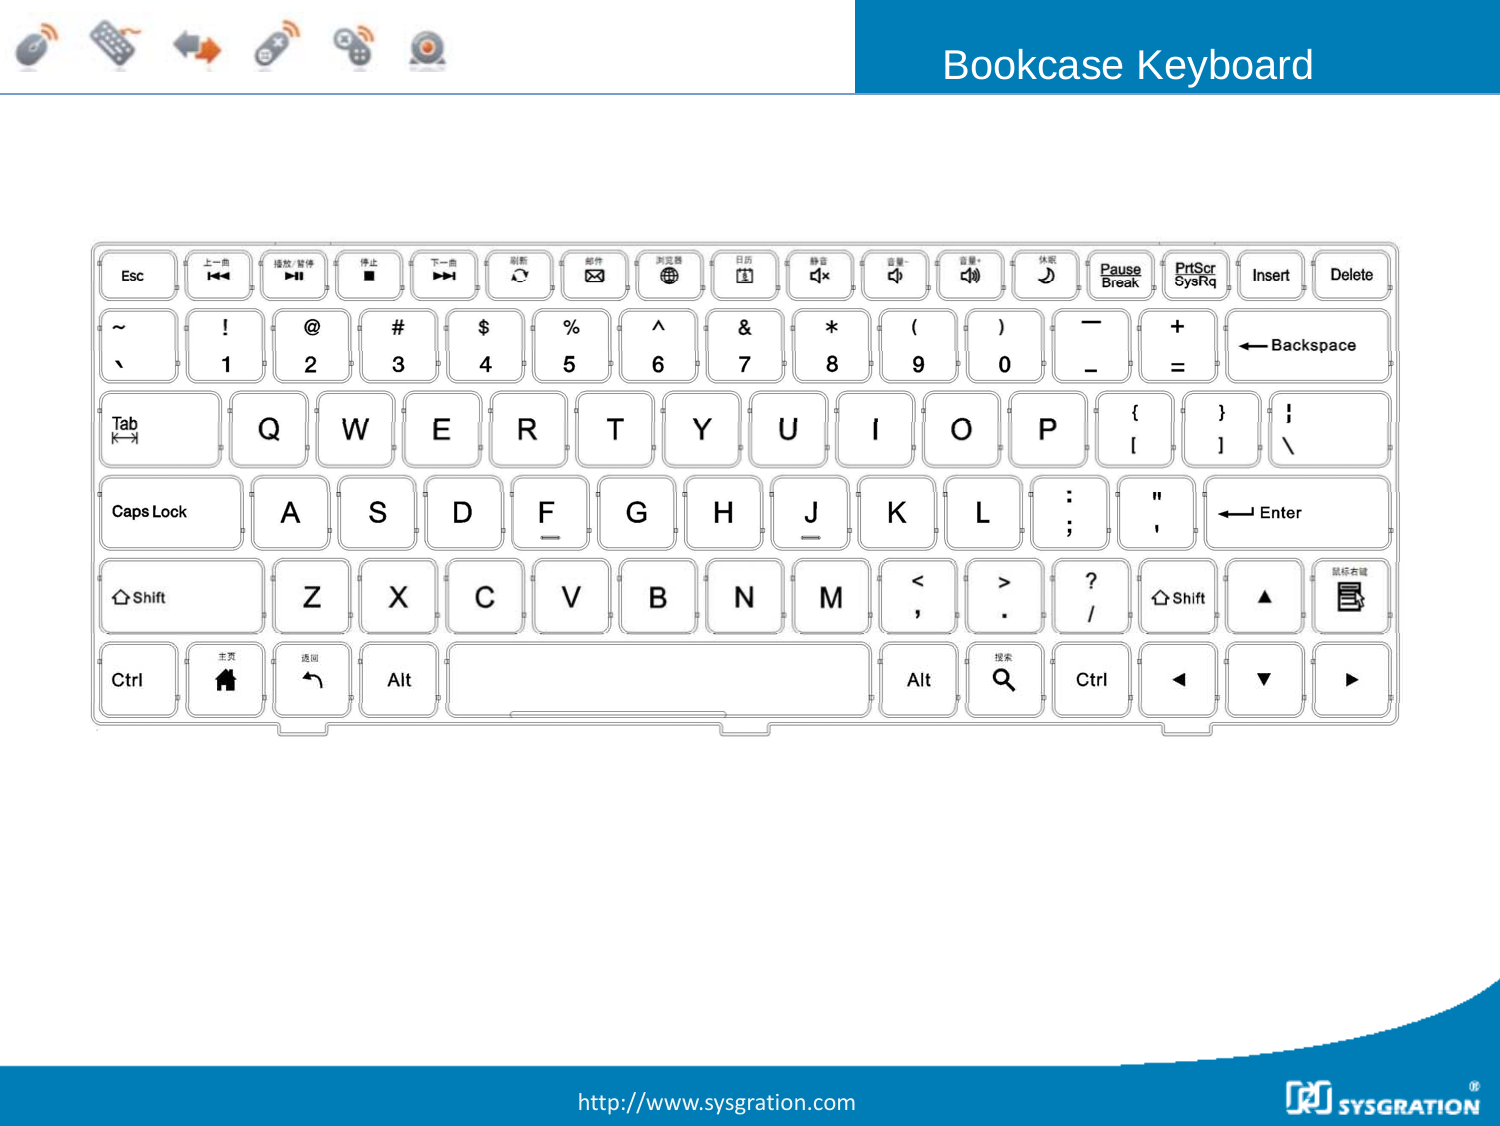 Bookcase Keyboardhttp://www.sysgration.com